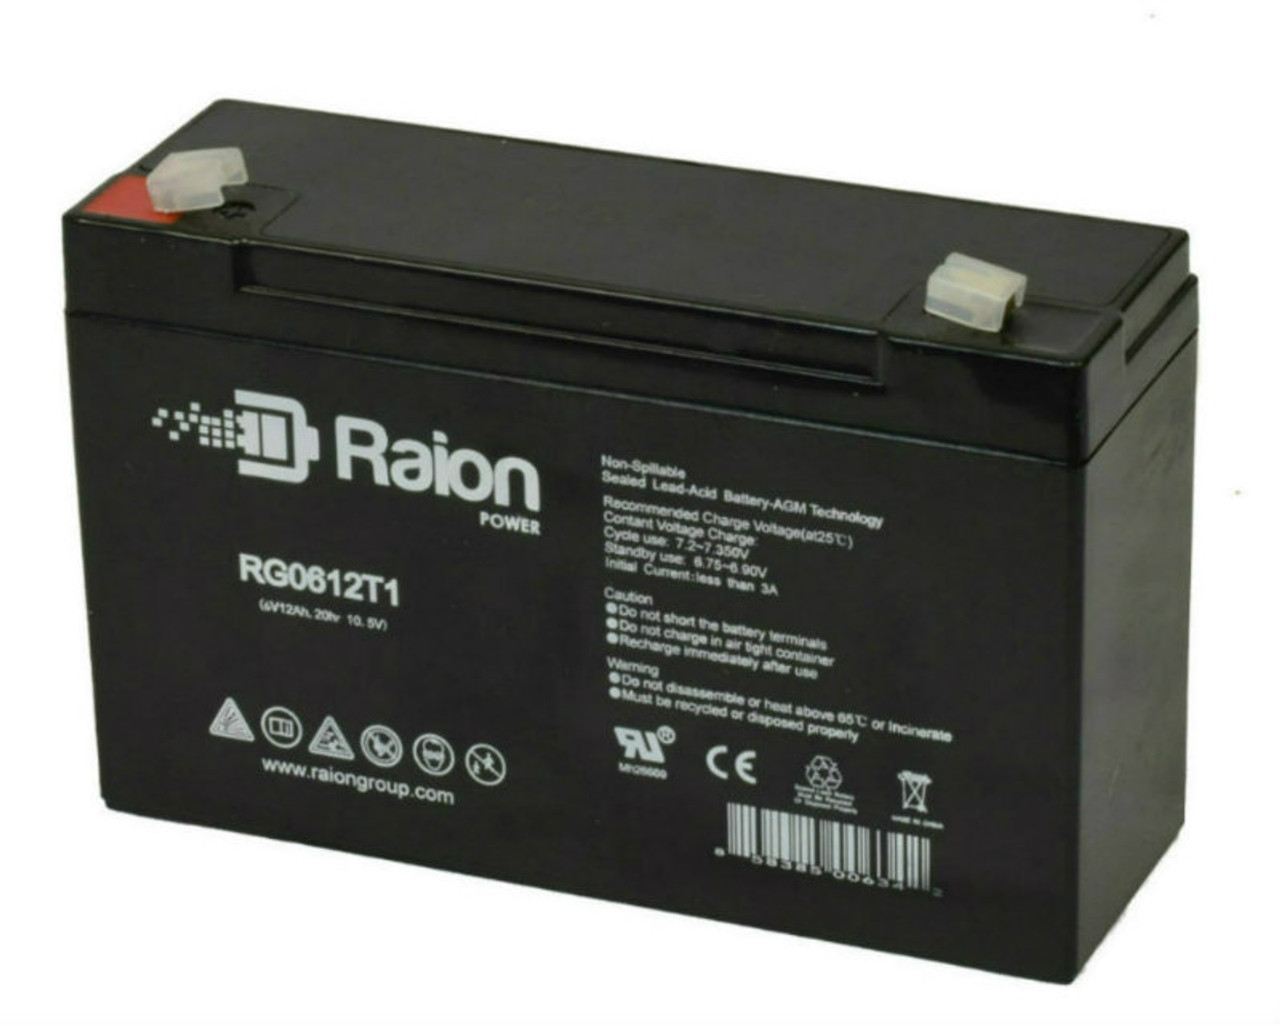 Raion Power RG06120T1 Replacement Emergency Light Battery for ELS ELS EDS6100